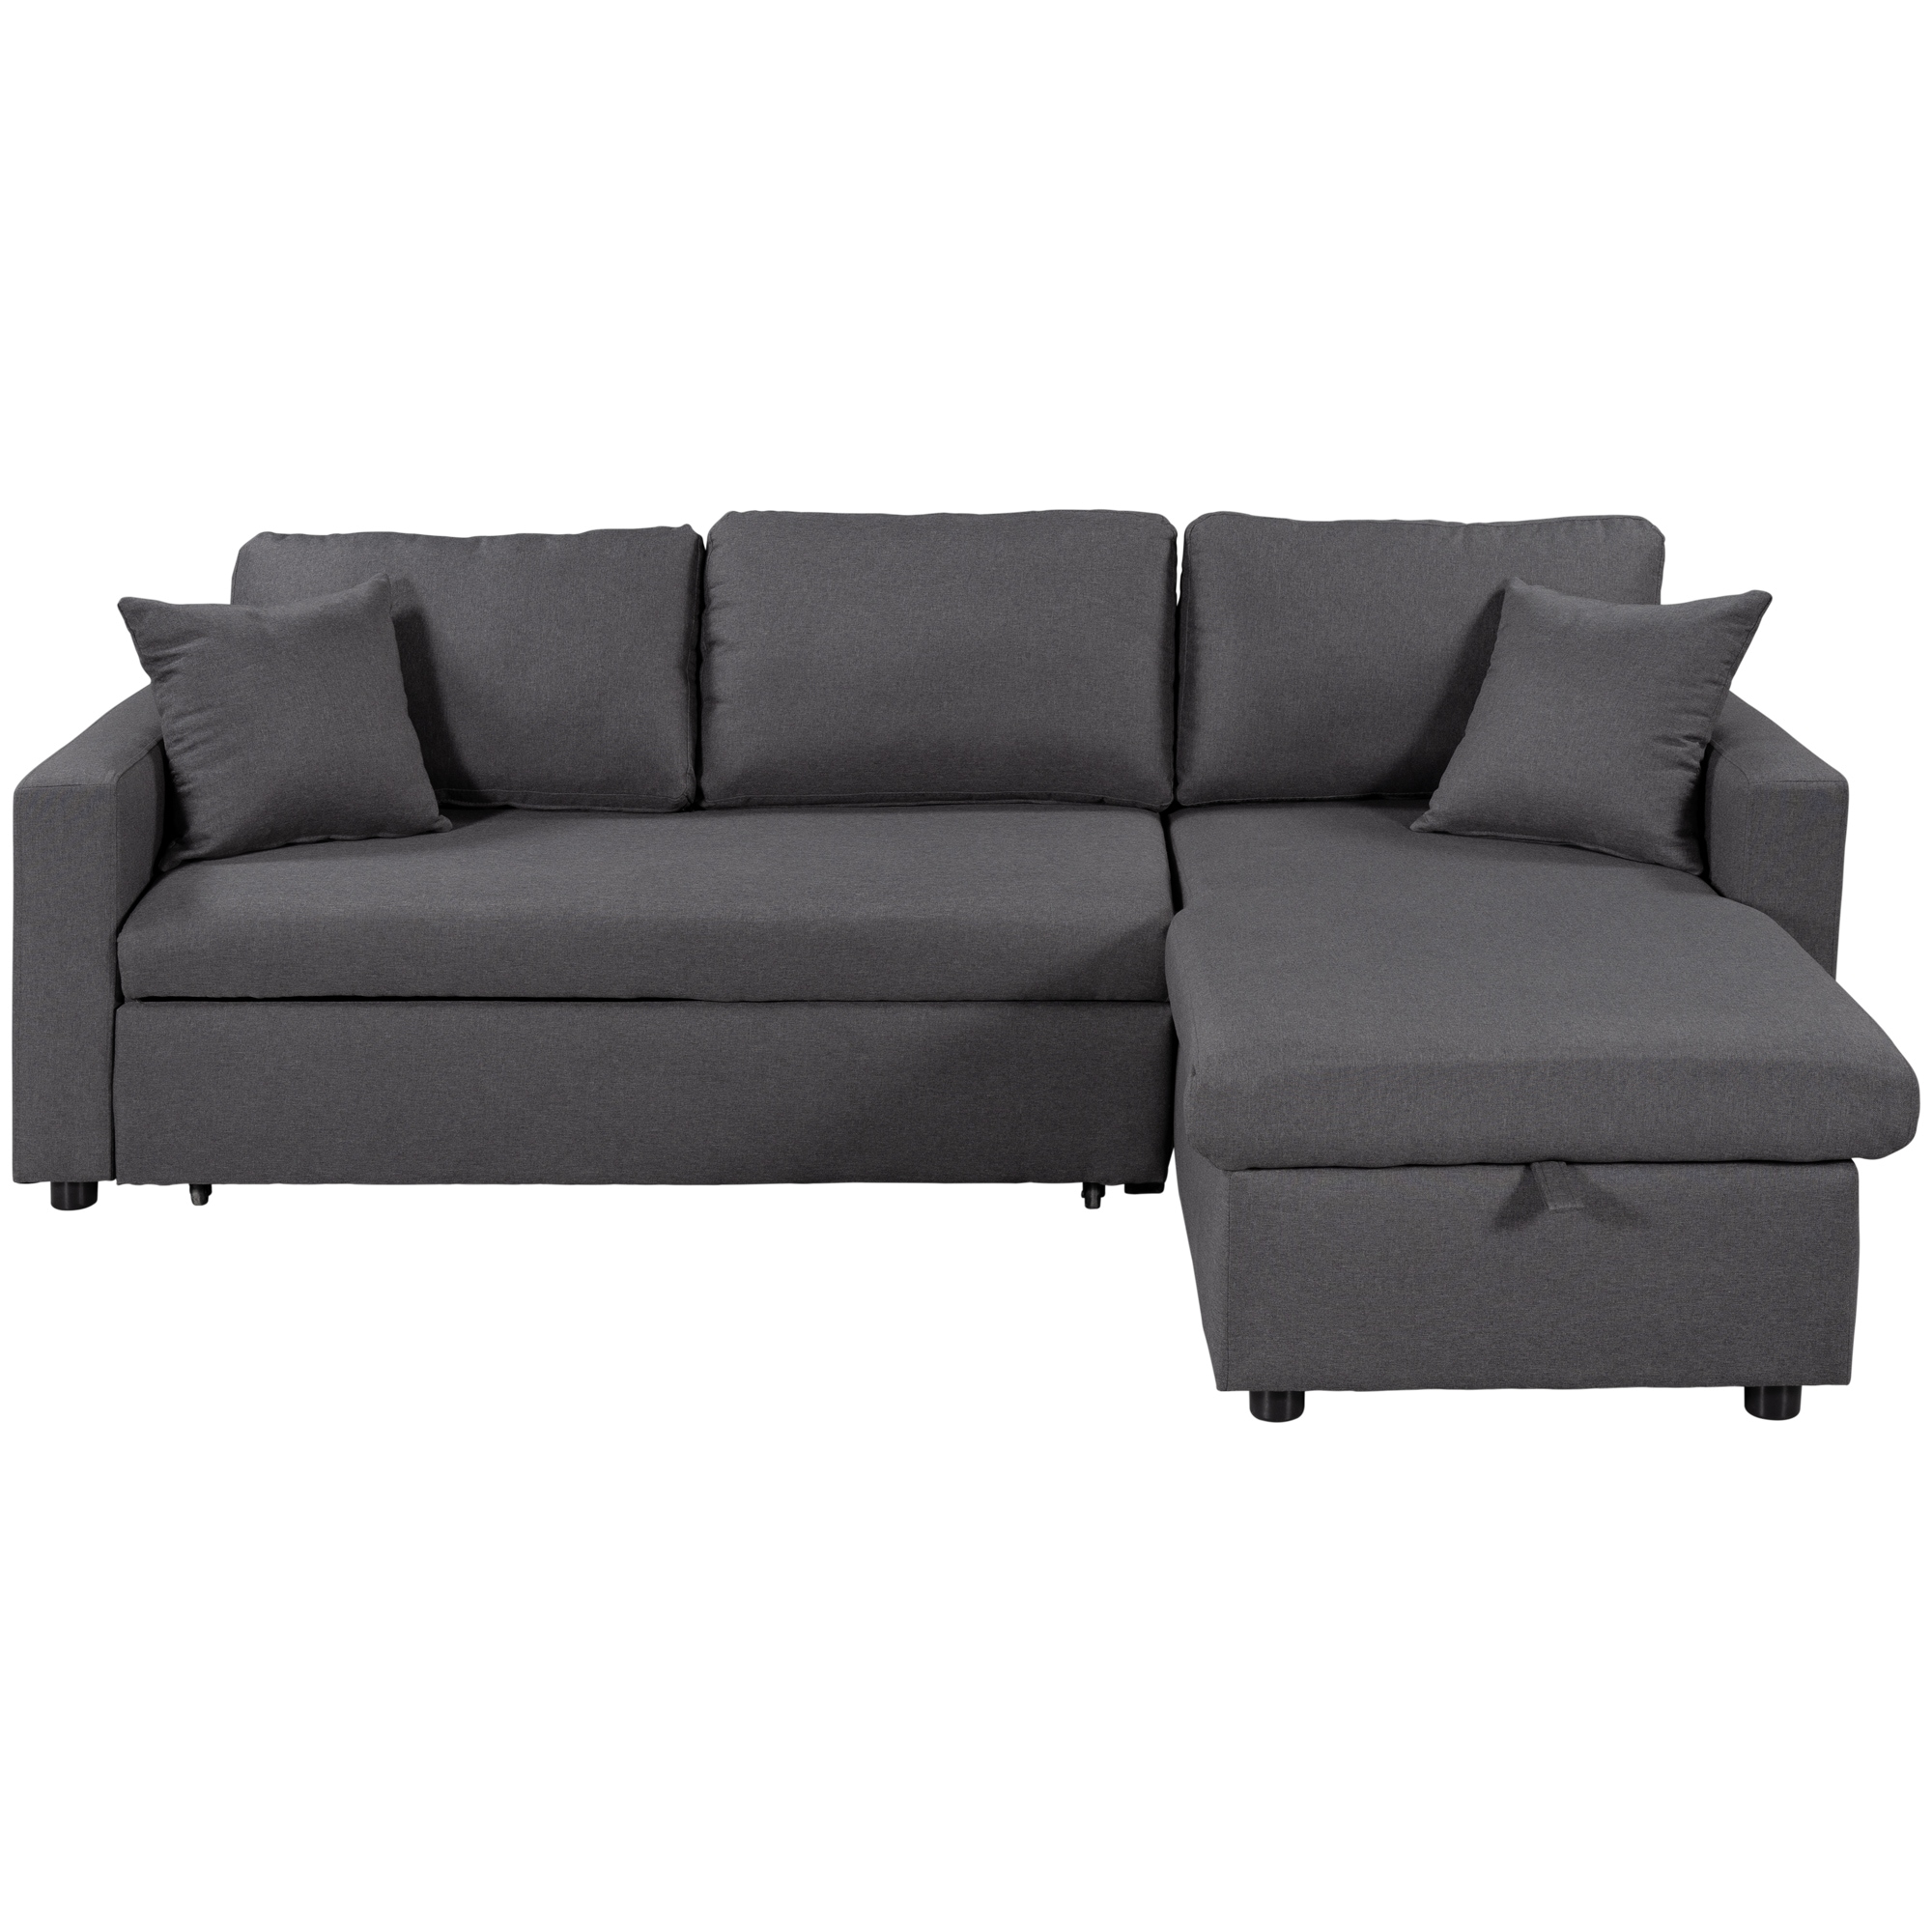 Clihome Upholstery Sleeper Sectional Sofa Grey with Storage Space Option 2